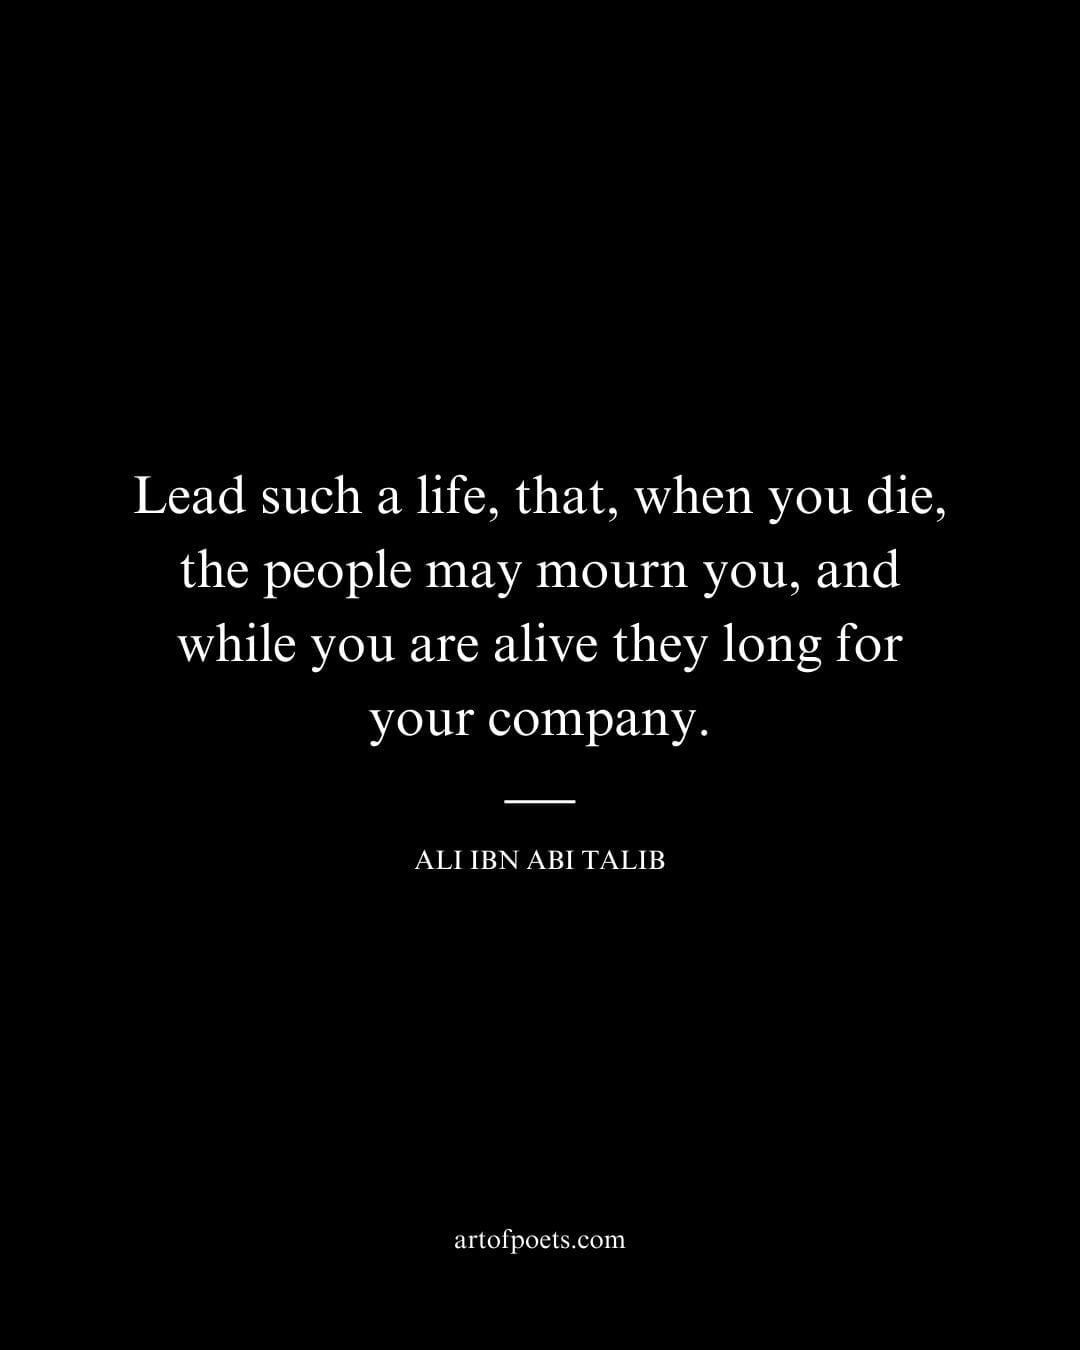 Lead such a life that when you die the people may mourn you and while you are alive they long for your company